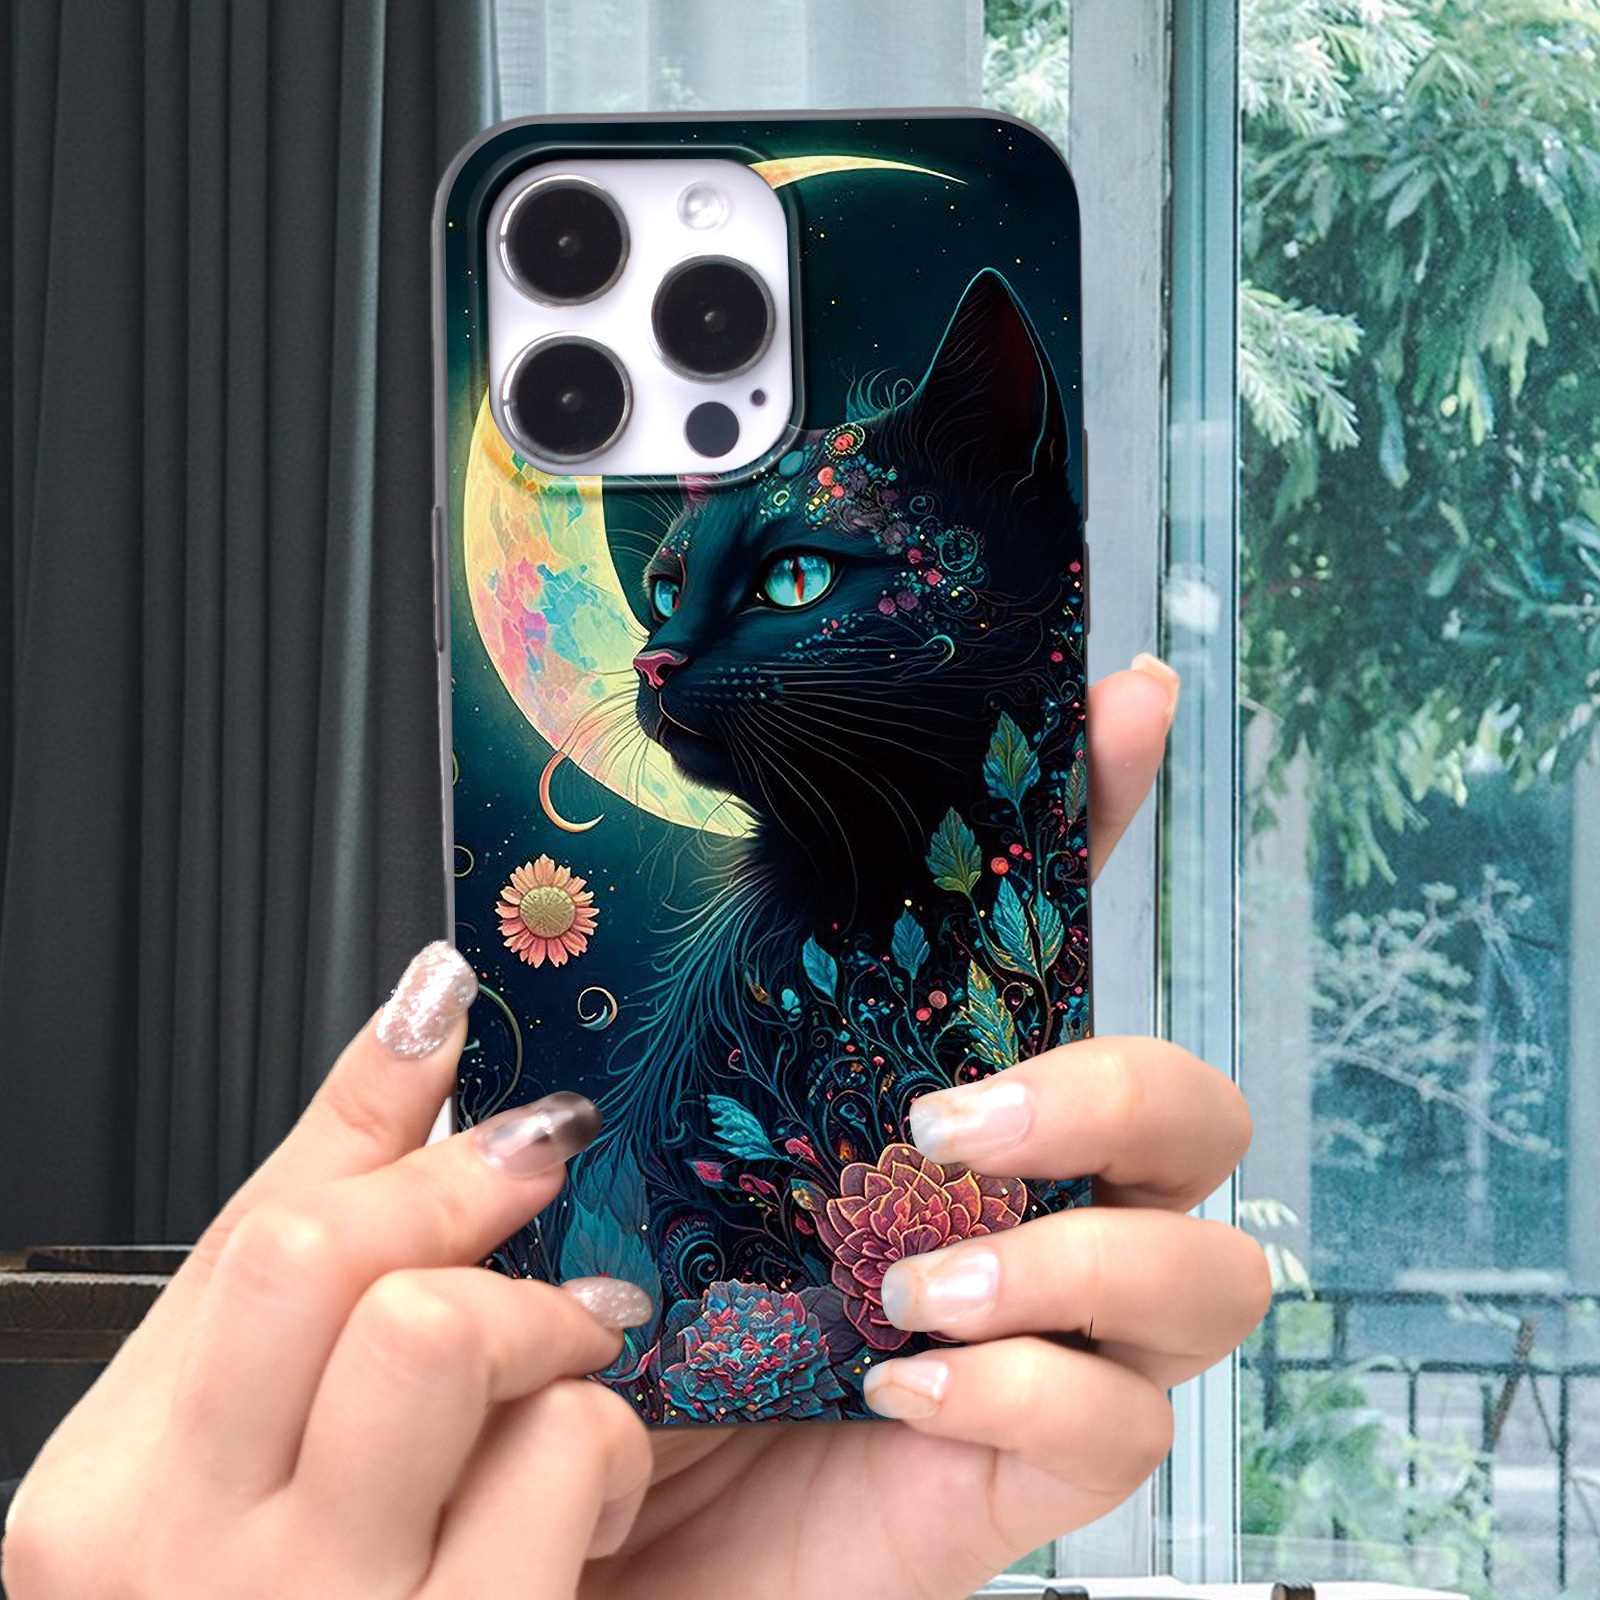 

Moon With Cat Pattern Tpu Material Shockproof Protective Phone Case For Iphone 7/8/se/x/xs/xr/11/12/13/14/15 Pro Max